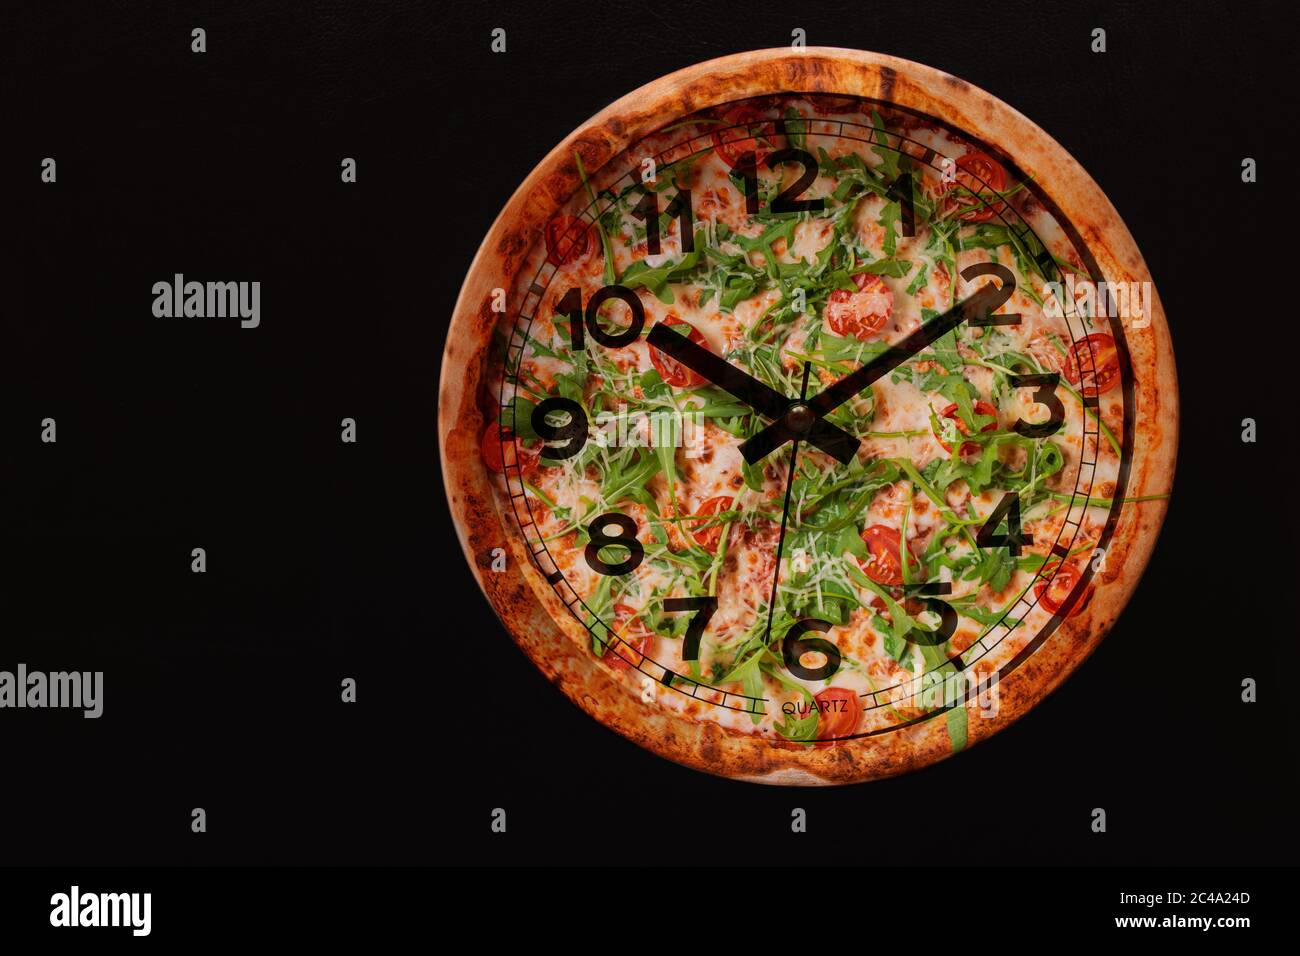 Pizza time in the form of a wall clock on a concrete background. Pizza clock. Place for text Stock Photo